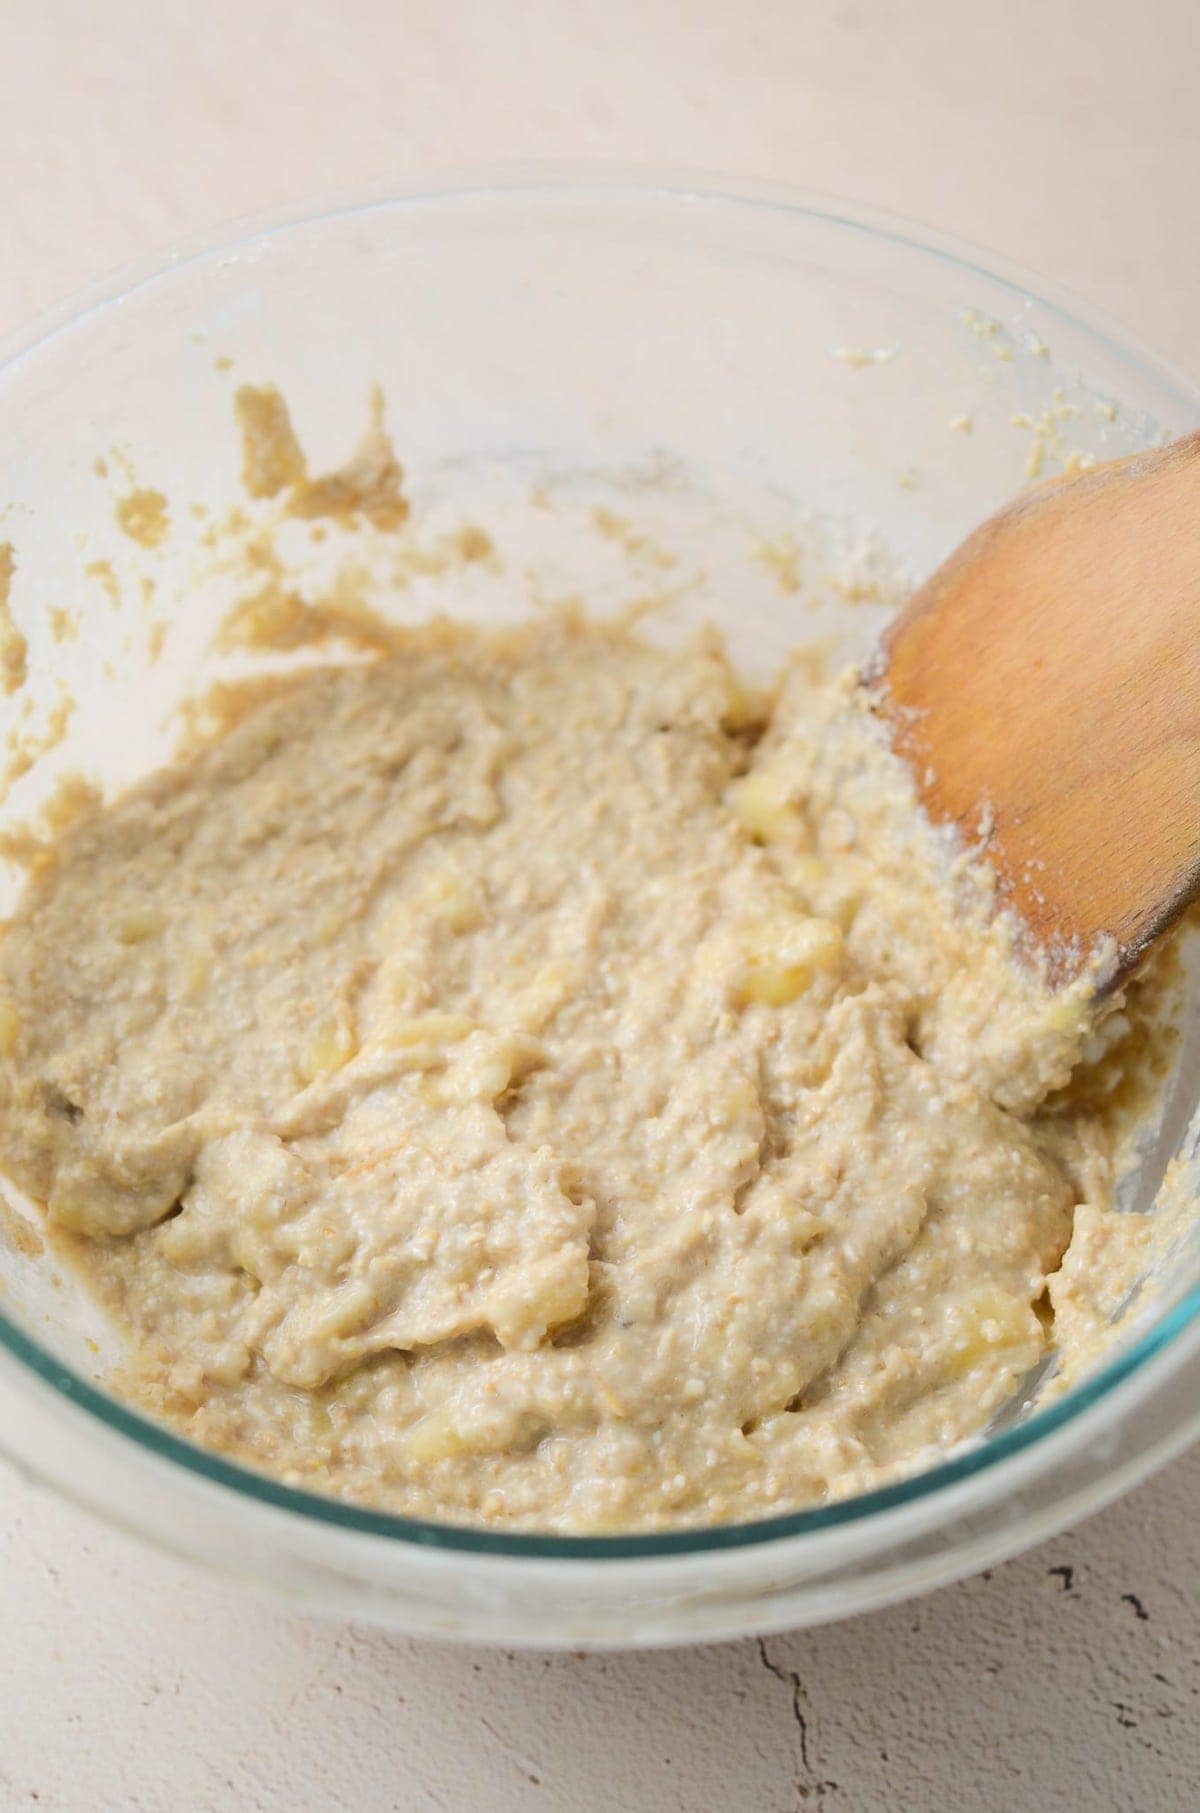 This is a photo of the batter mixed together.